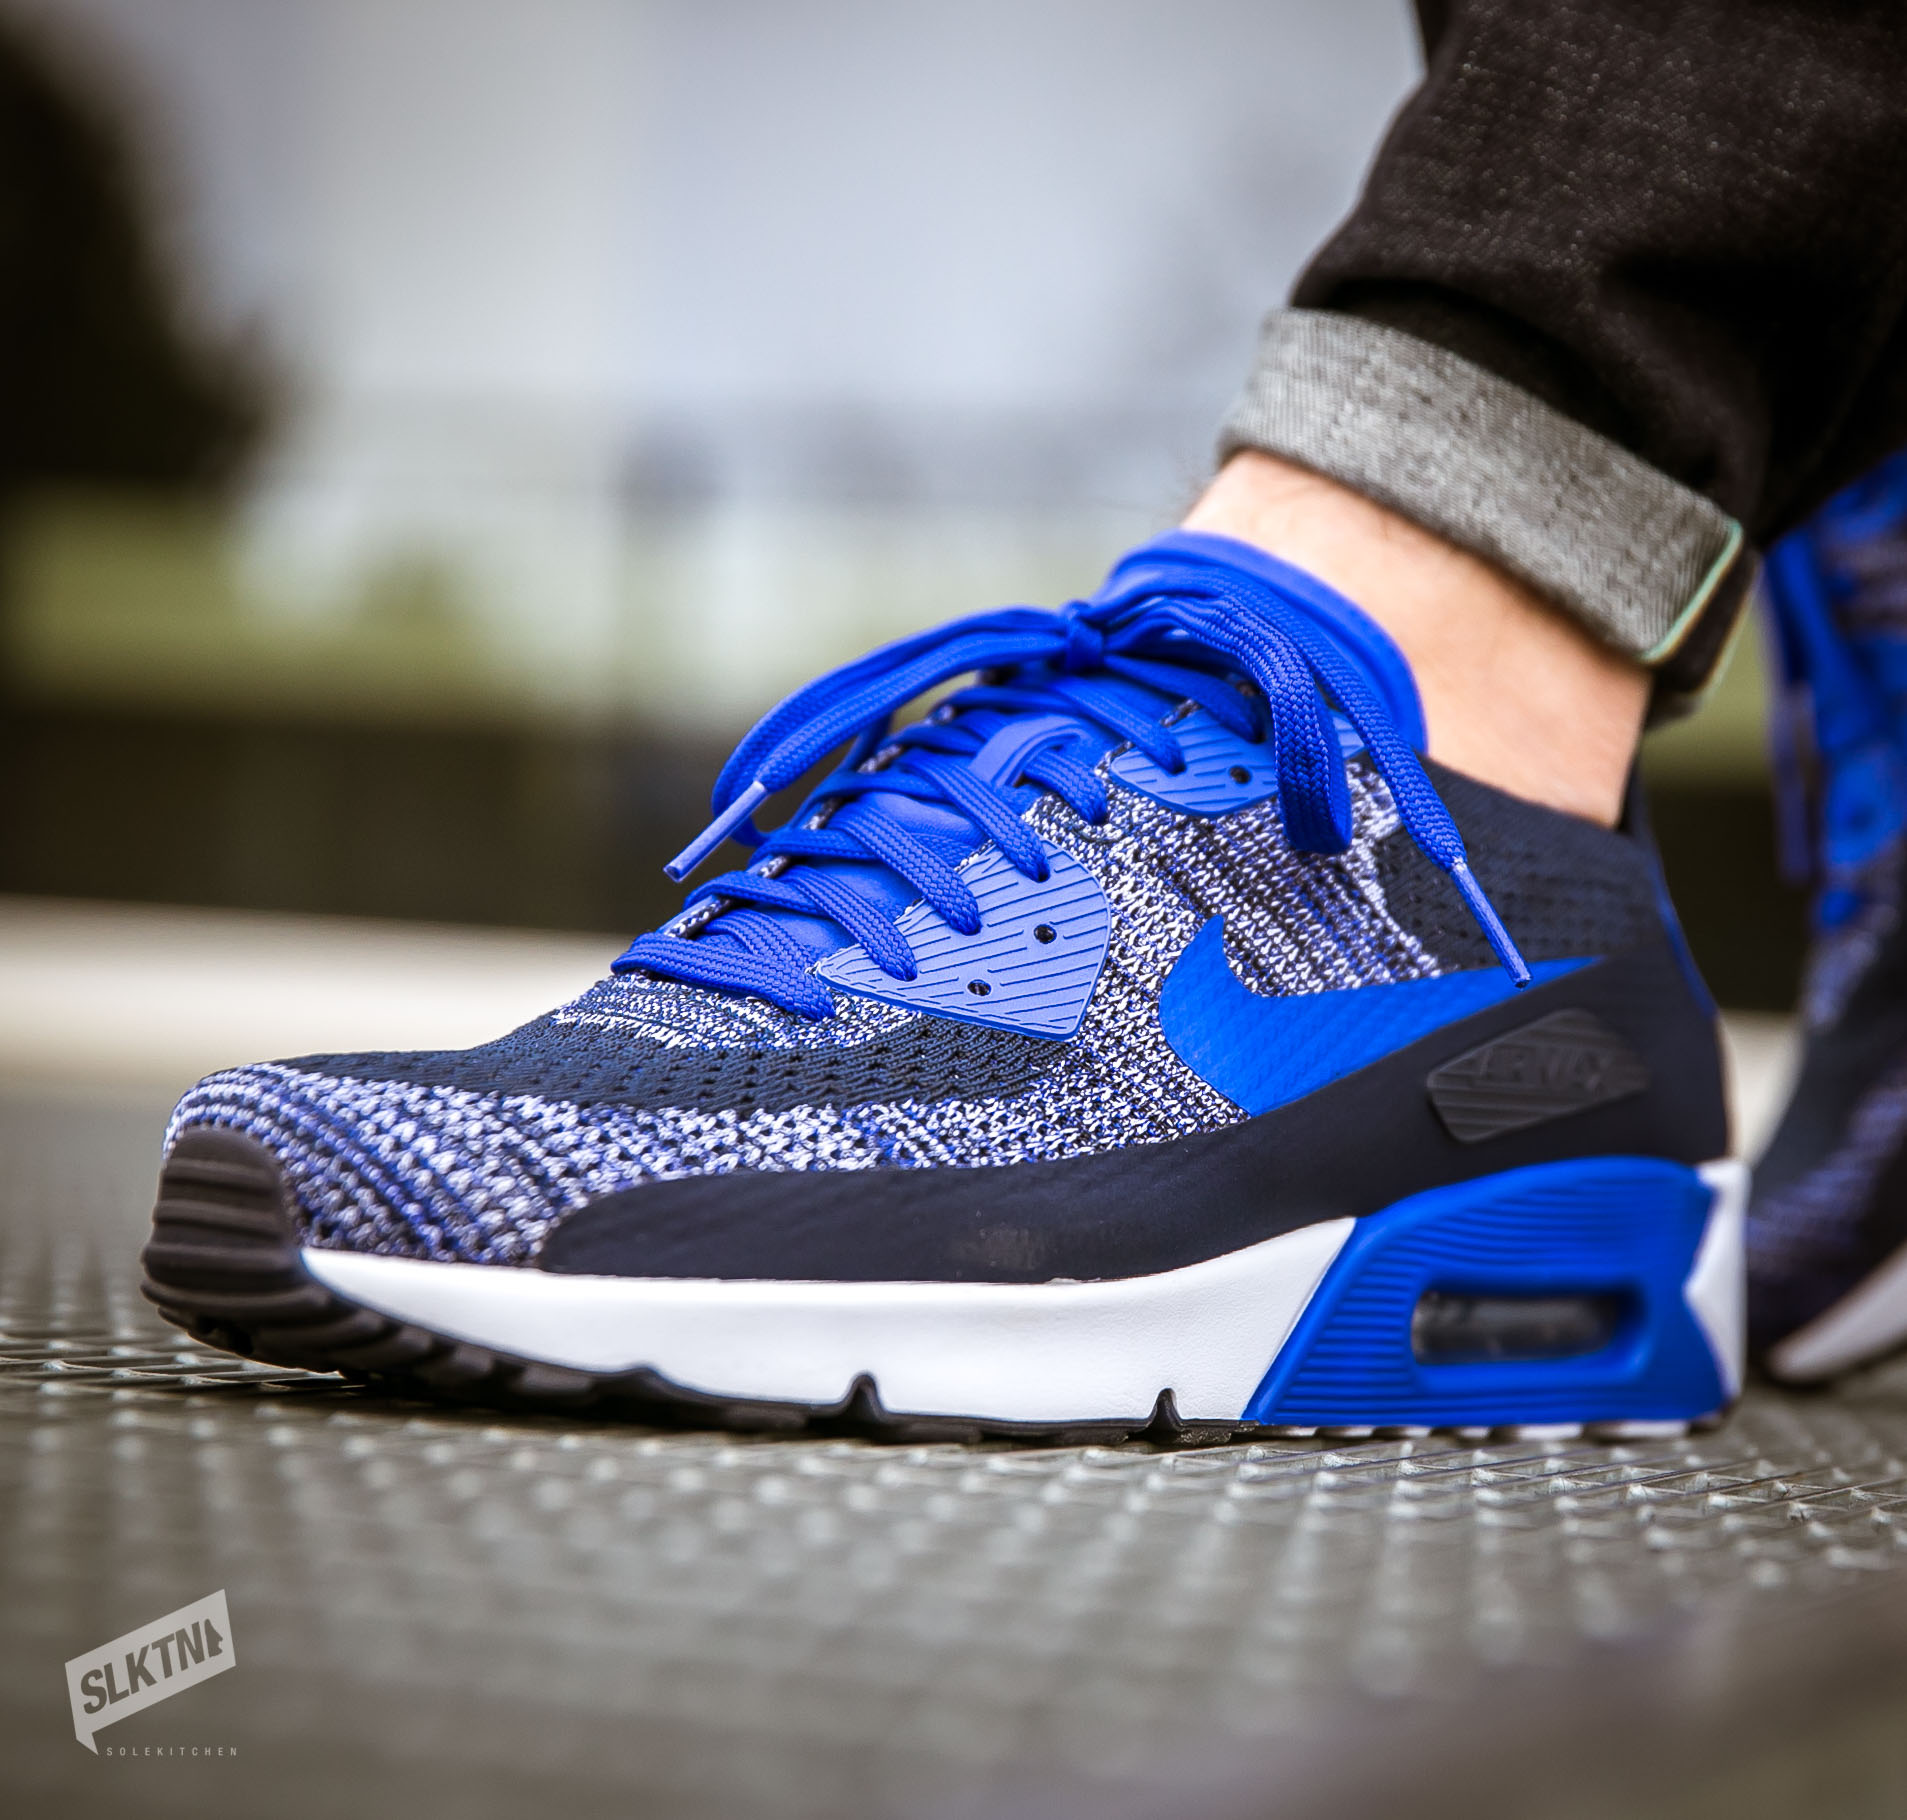 Attent Vooruitgaan niettemin Nike Air Max 90 Ultra 2.0 "College Navy" // Available Now | Nice Kicks